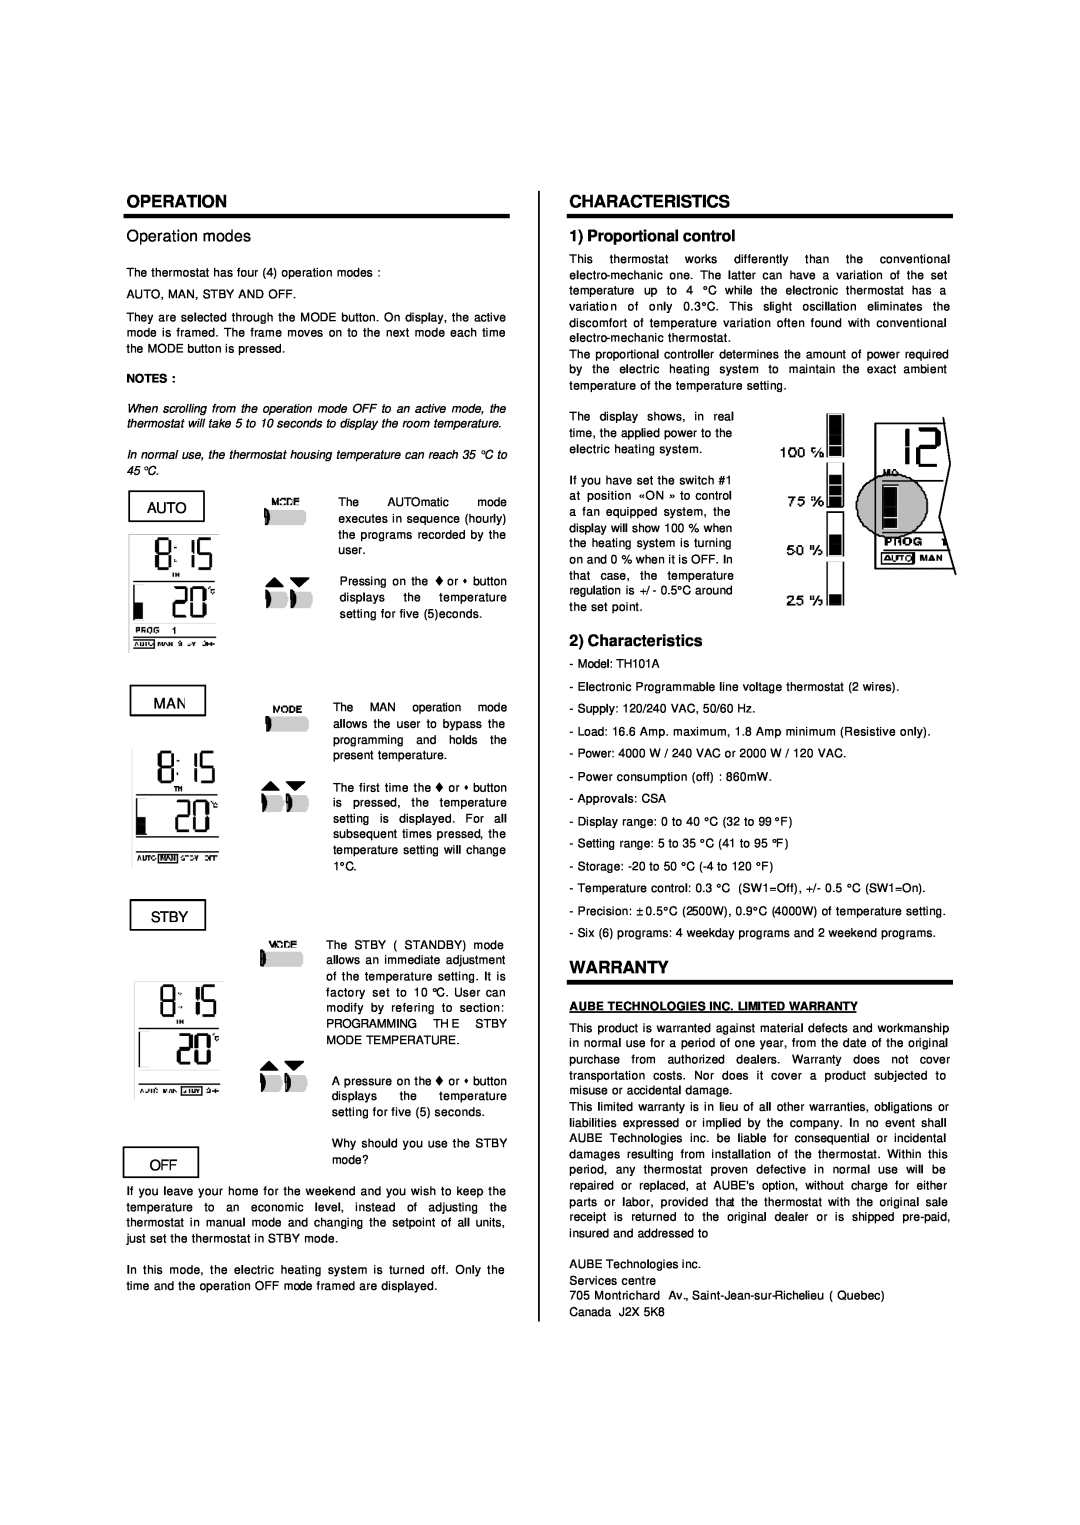 Aube Technologies TH101A manual Characteristics, Warranty, Operation modes, Proportional control, Auto, Stby 